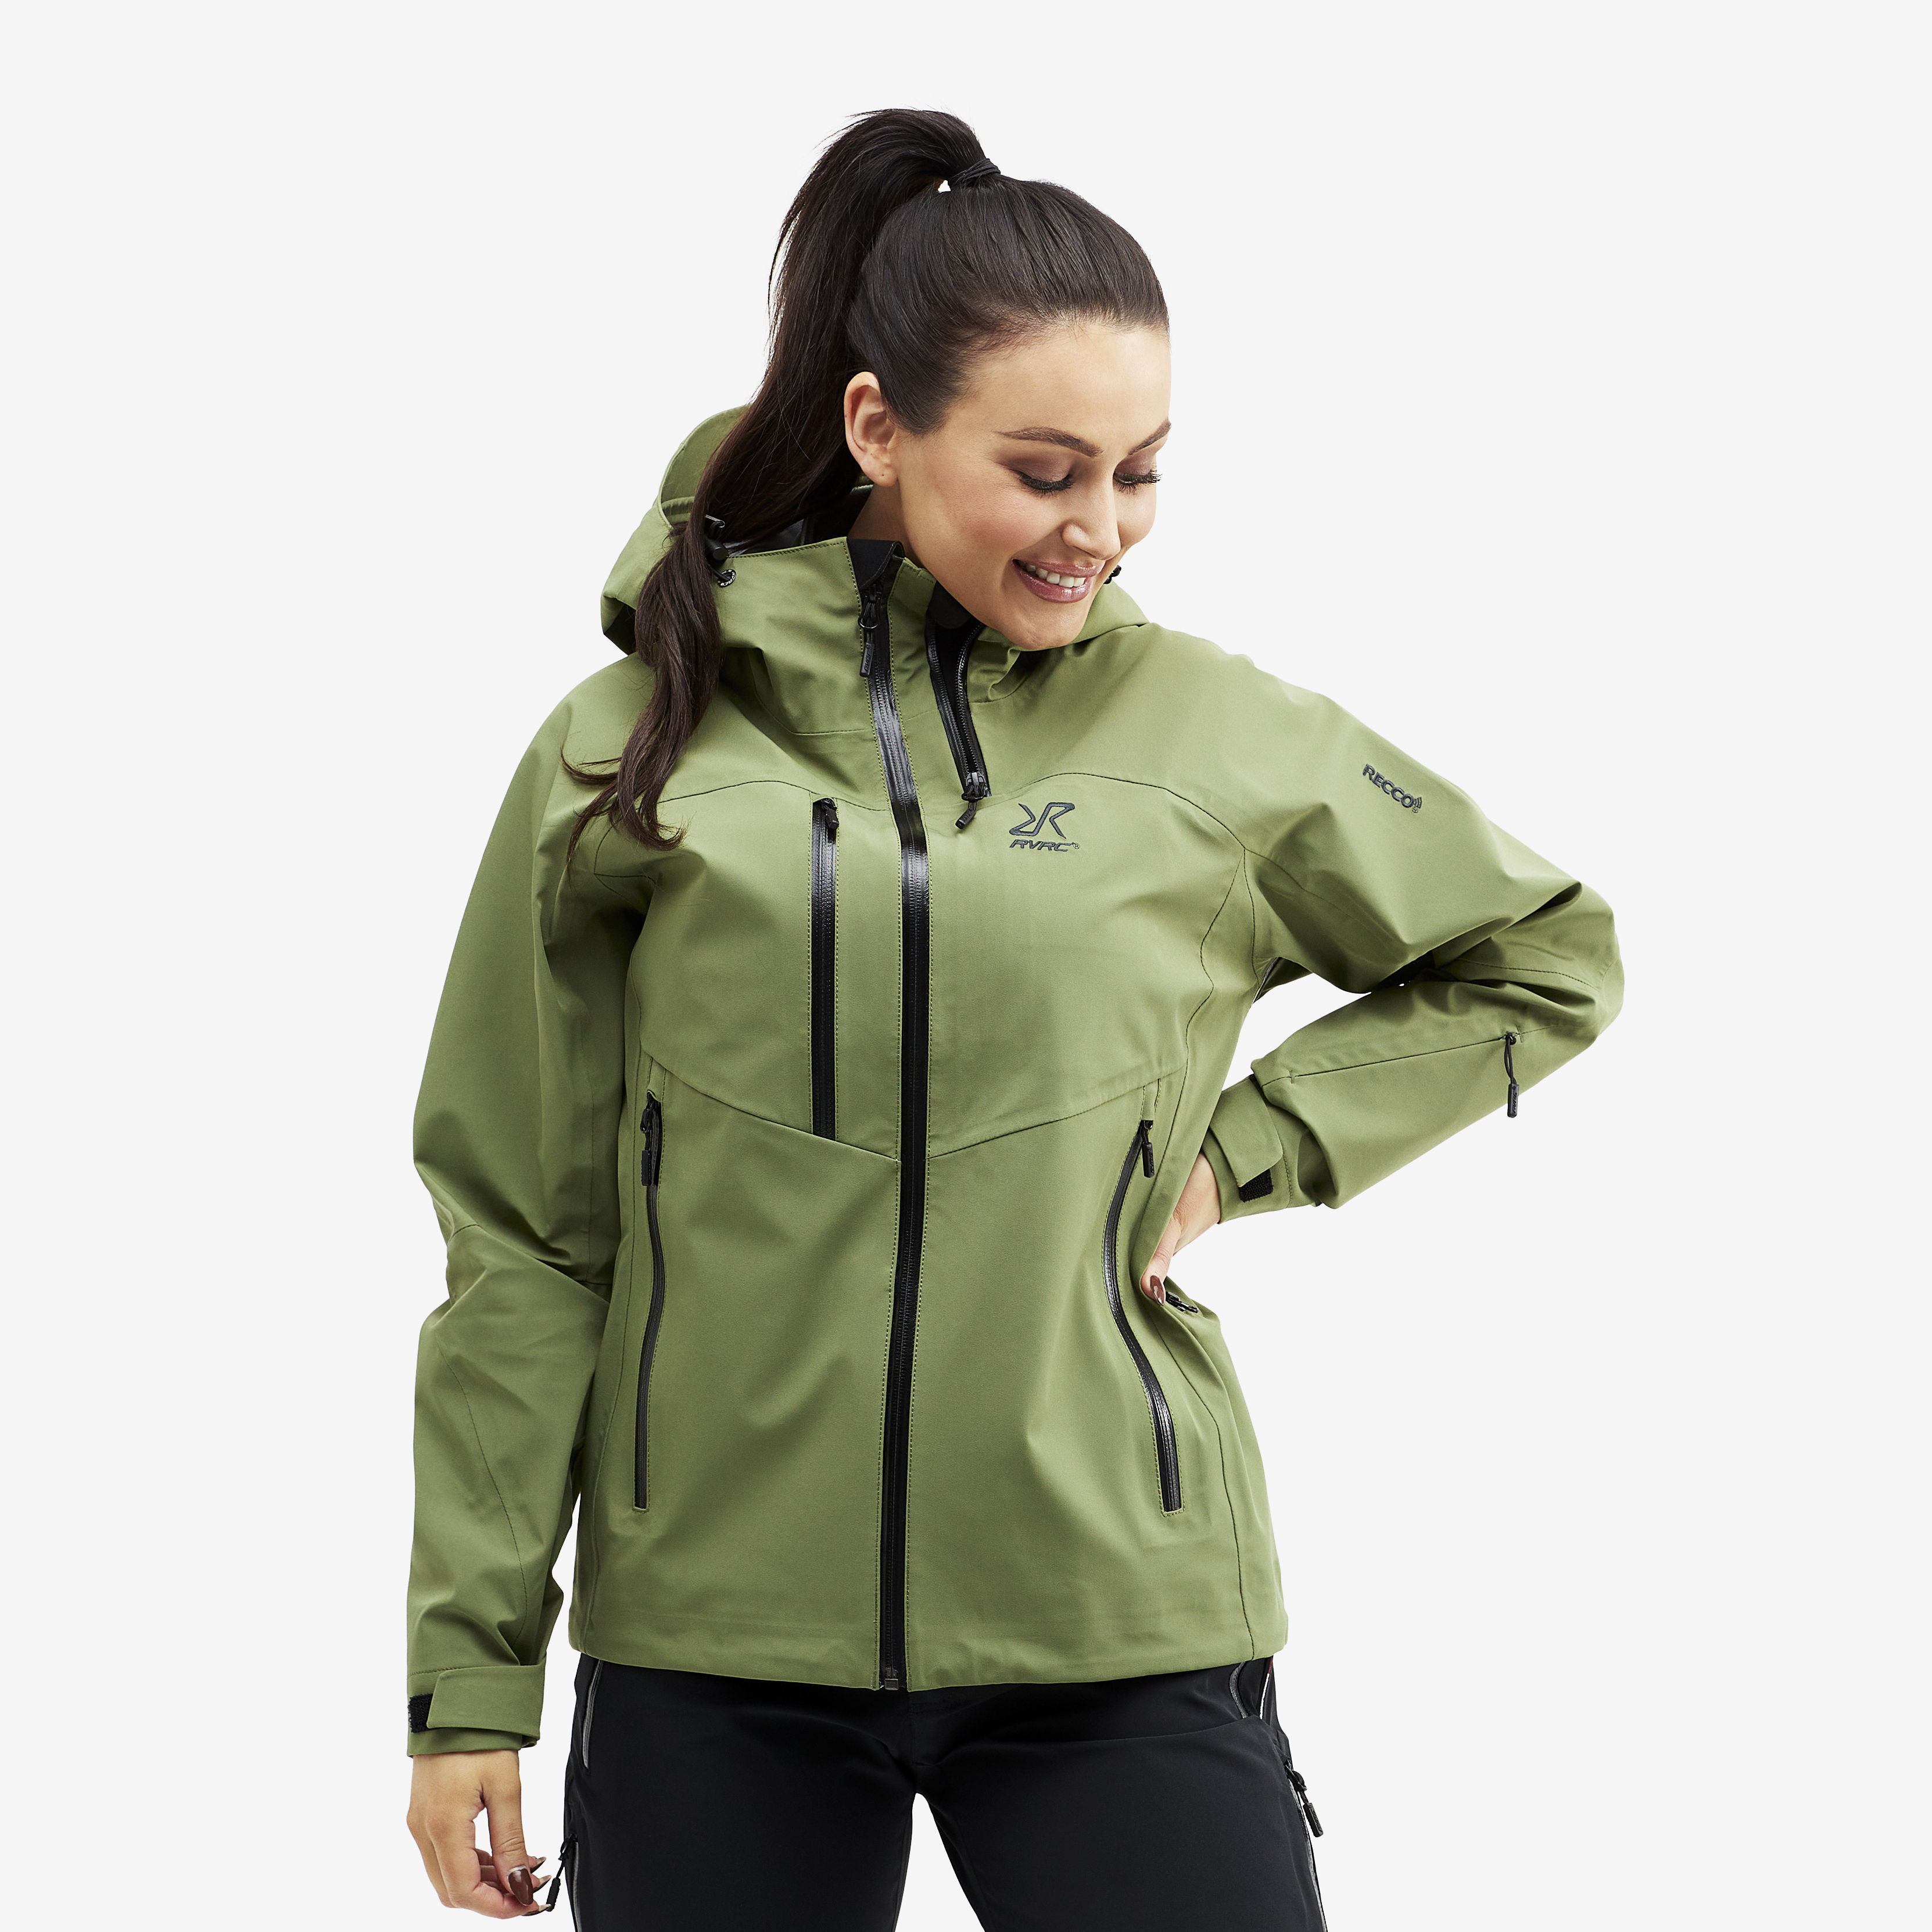 Cyclone Rescue Jacket 2.0 Pine Green Femme